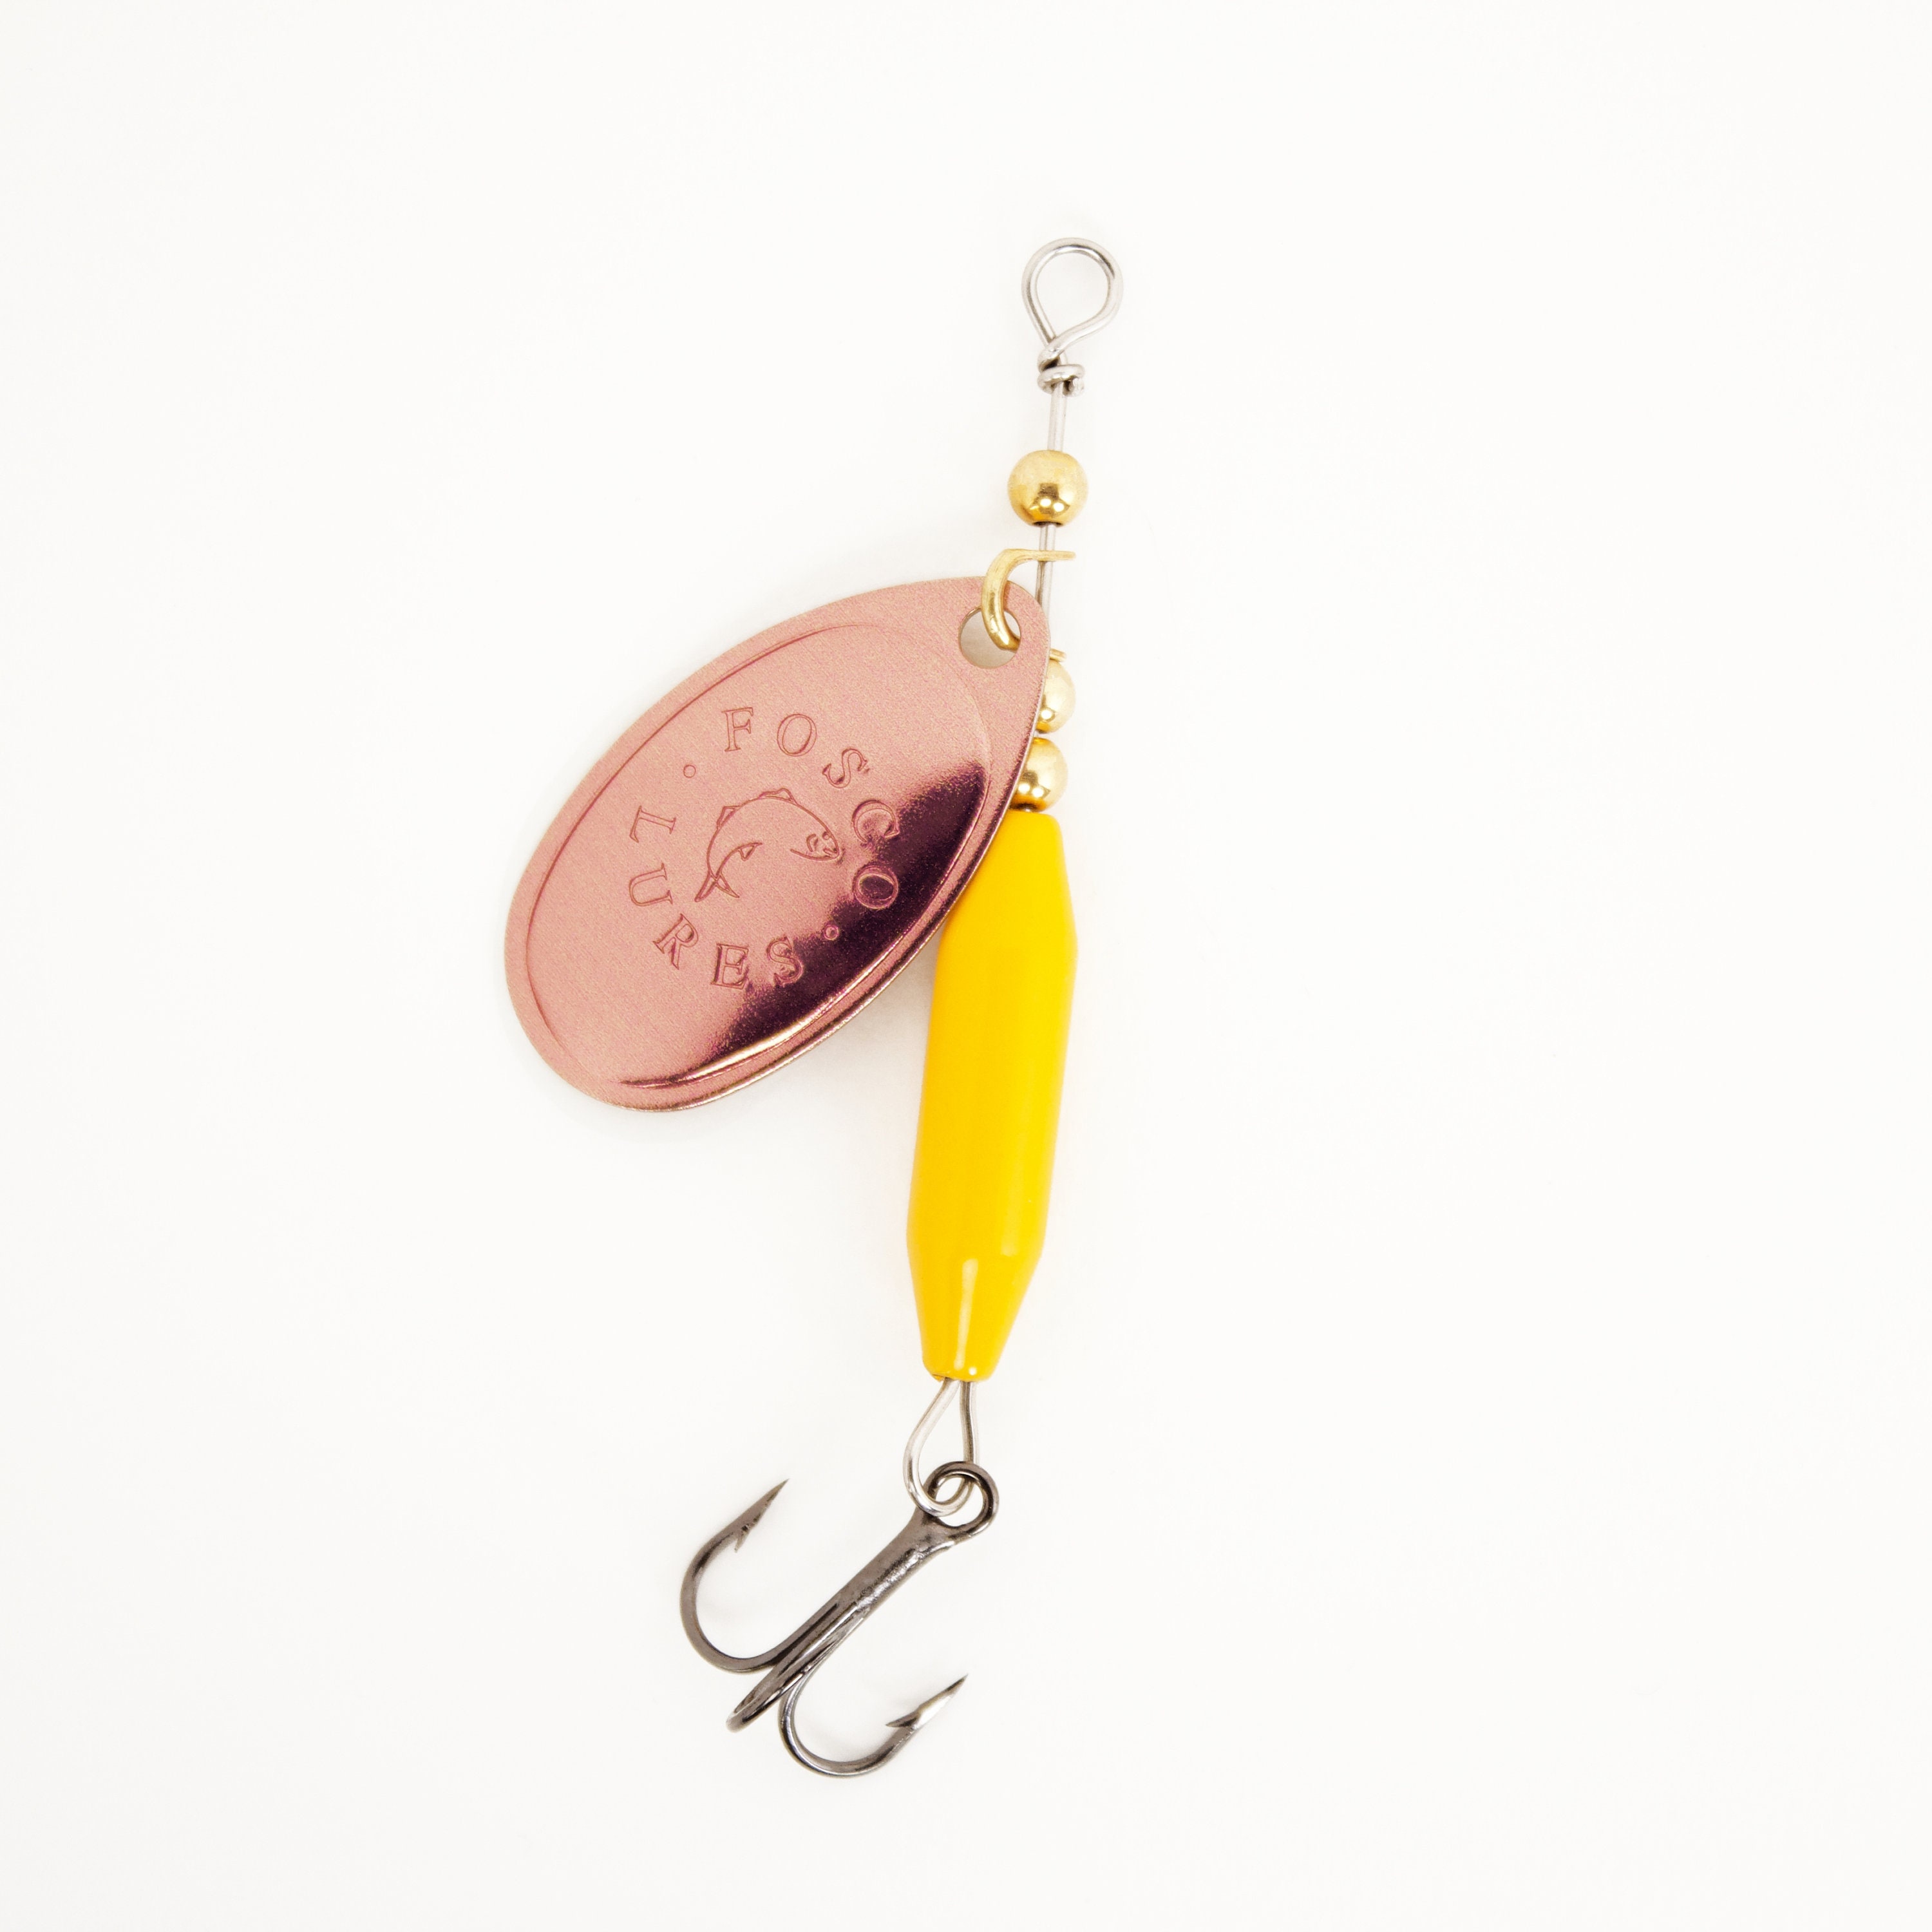 Handmade Spinner Fishing Lure Yellow W/ Black Blade Inline Spinner Made in  Canada Trout Salmon Bass Pike Perch Walleye Fishing Gift -  Canada